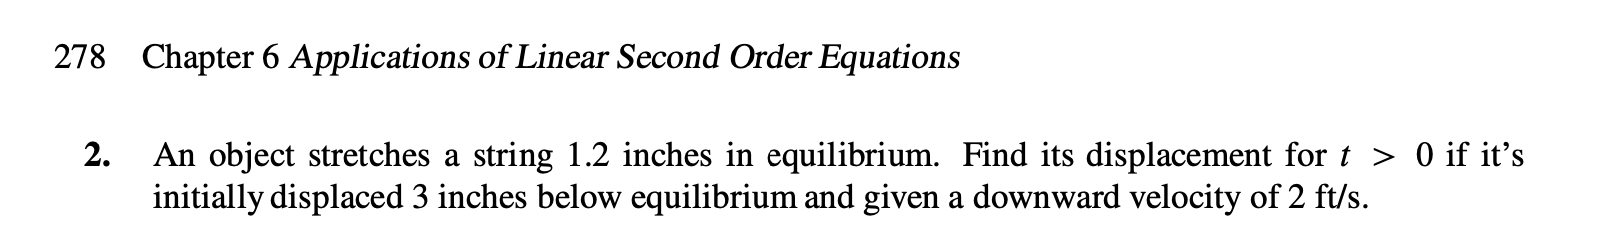 Chapter 6 Applications of Linear Second Order Equations
278
2.
An object stretches a string 1.2 inches in equilibrium. Find its displacement for t > 0 if it's
initially displaced 3 inches below equilibrium and given a downward velocity of 2 ft/s
